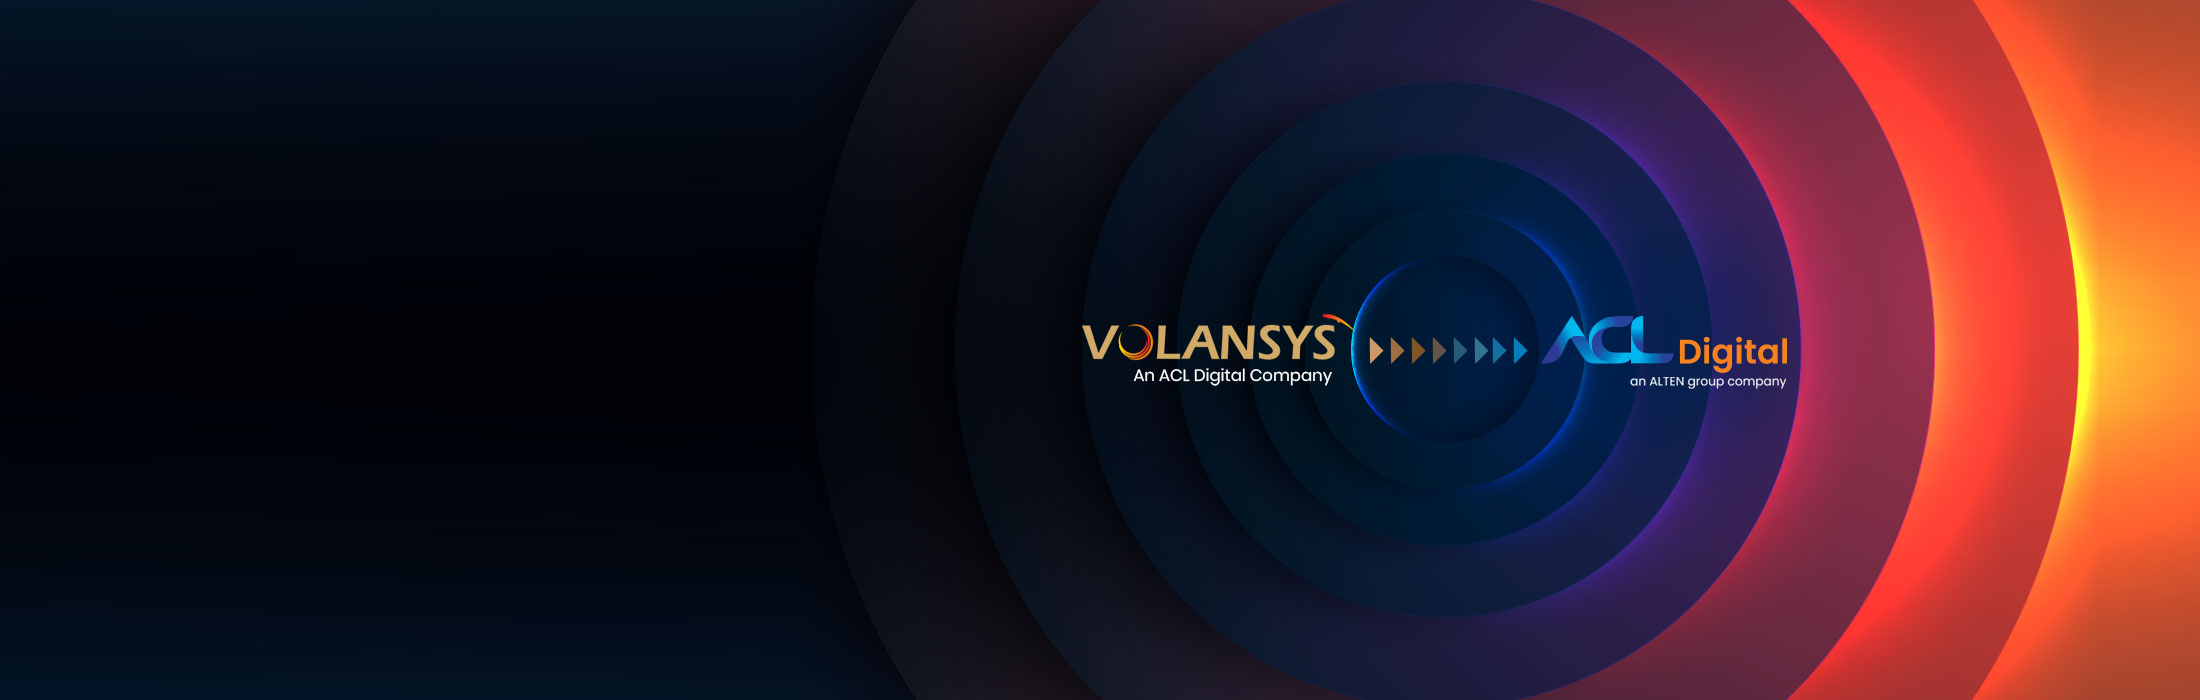 banner-banner-ACL Digital newsroom VOLANSYS